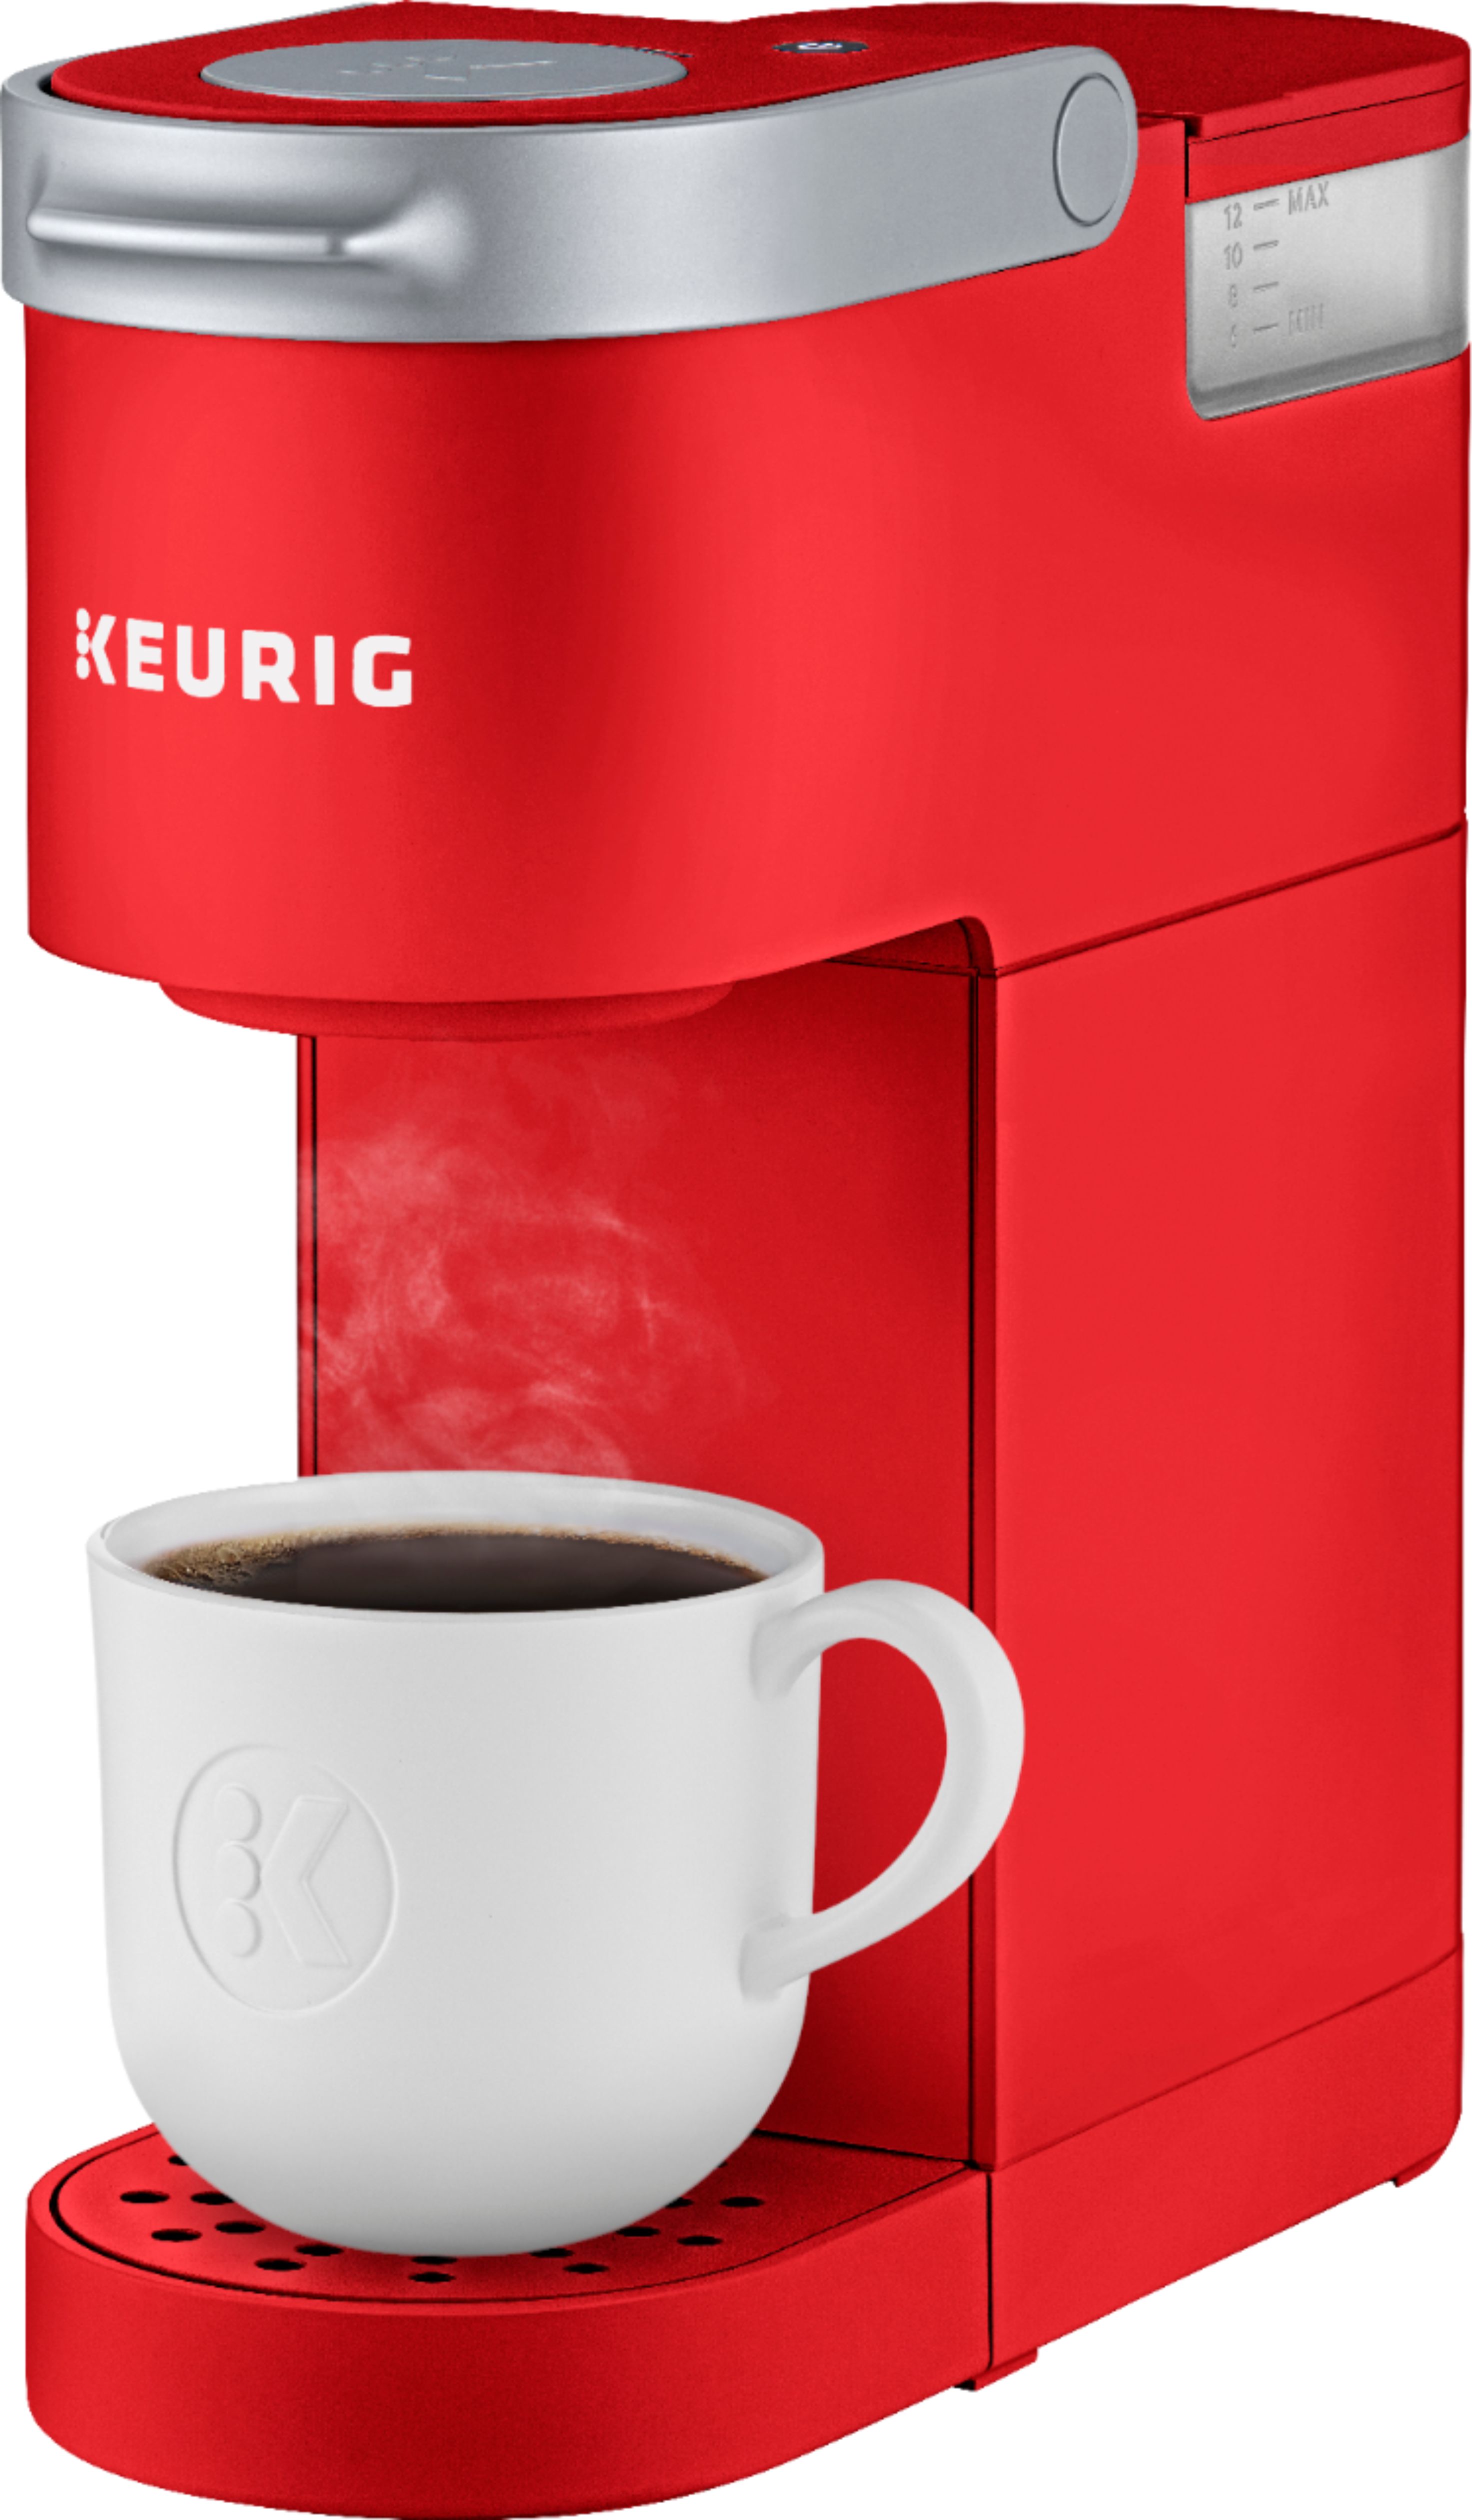 Keurig K-Compact Imperial Red Single-Serve K-Cup Pod Coffee Maker